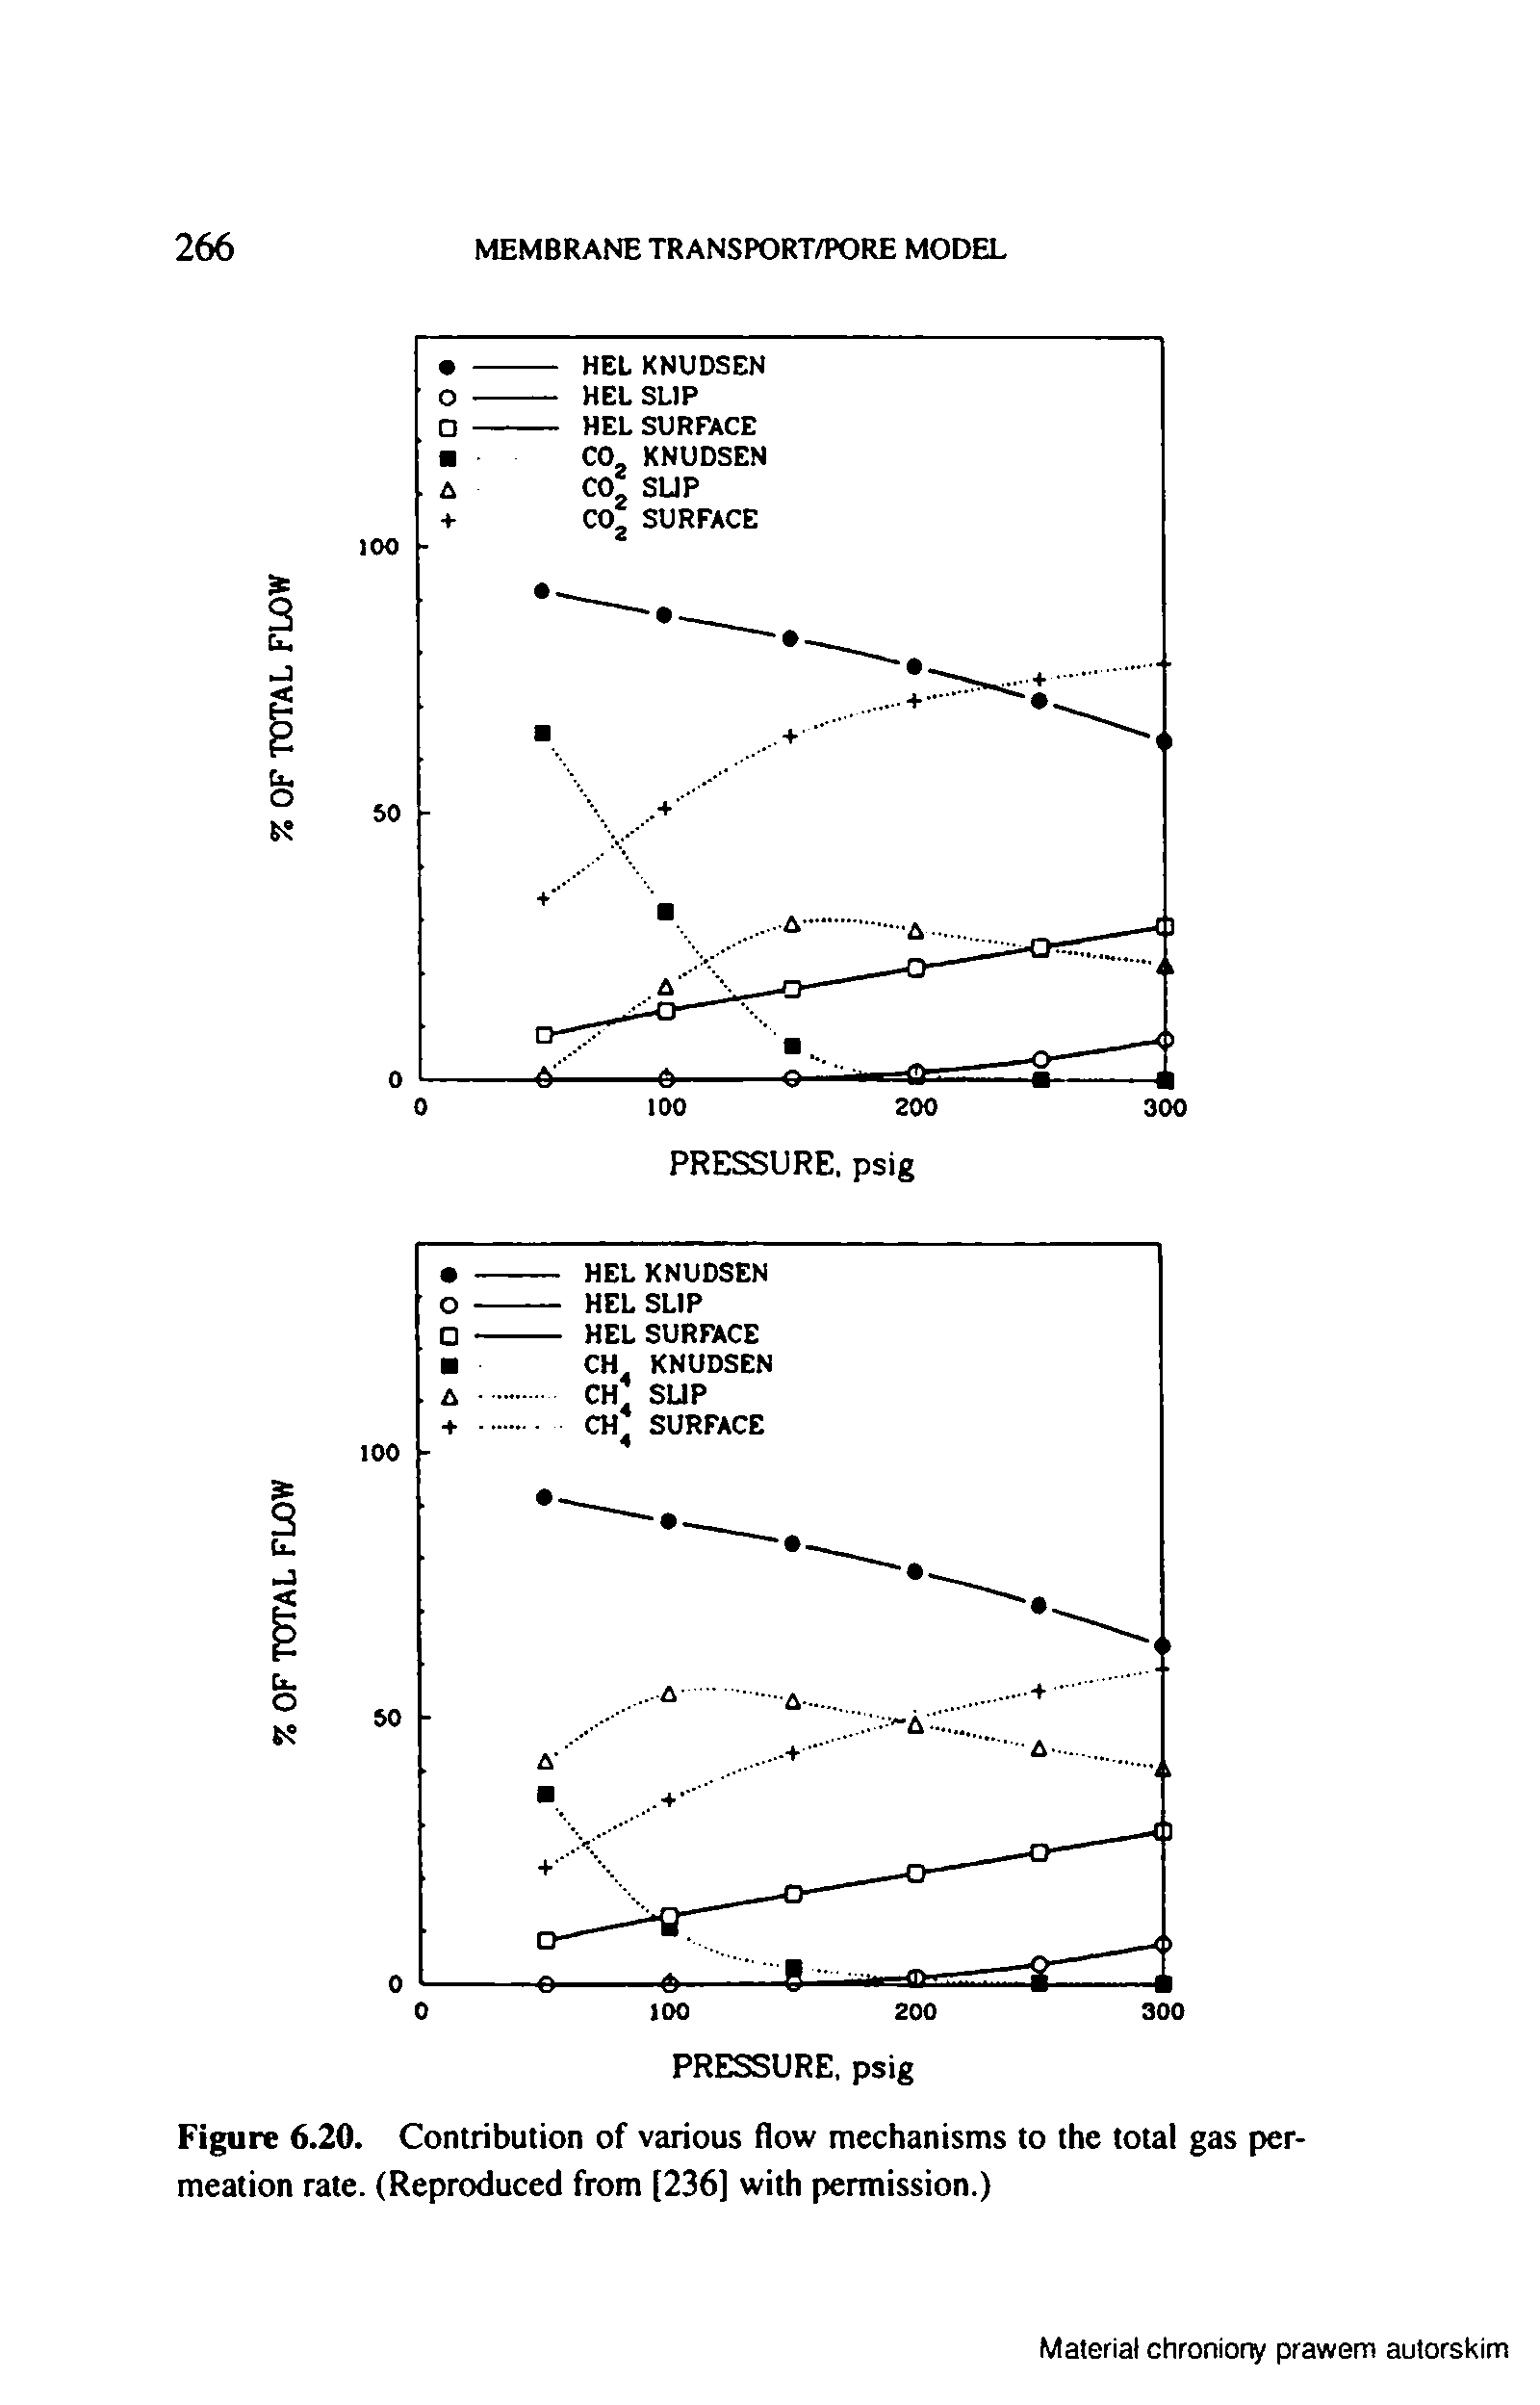 Figure 6.20. Contribution of various flow mechanisms to the total gas permeation rate. (Reproduced from [236] with permission.)...